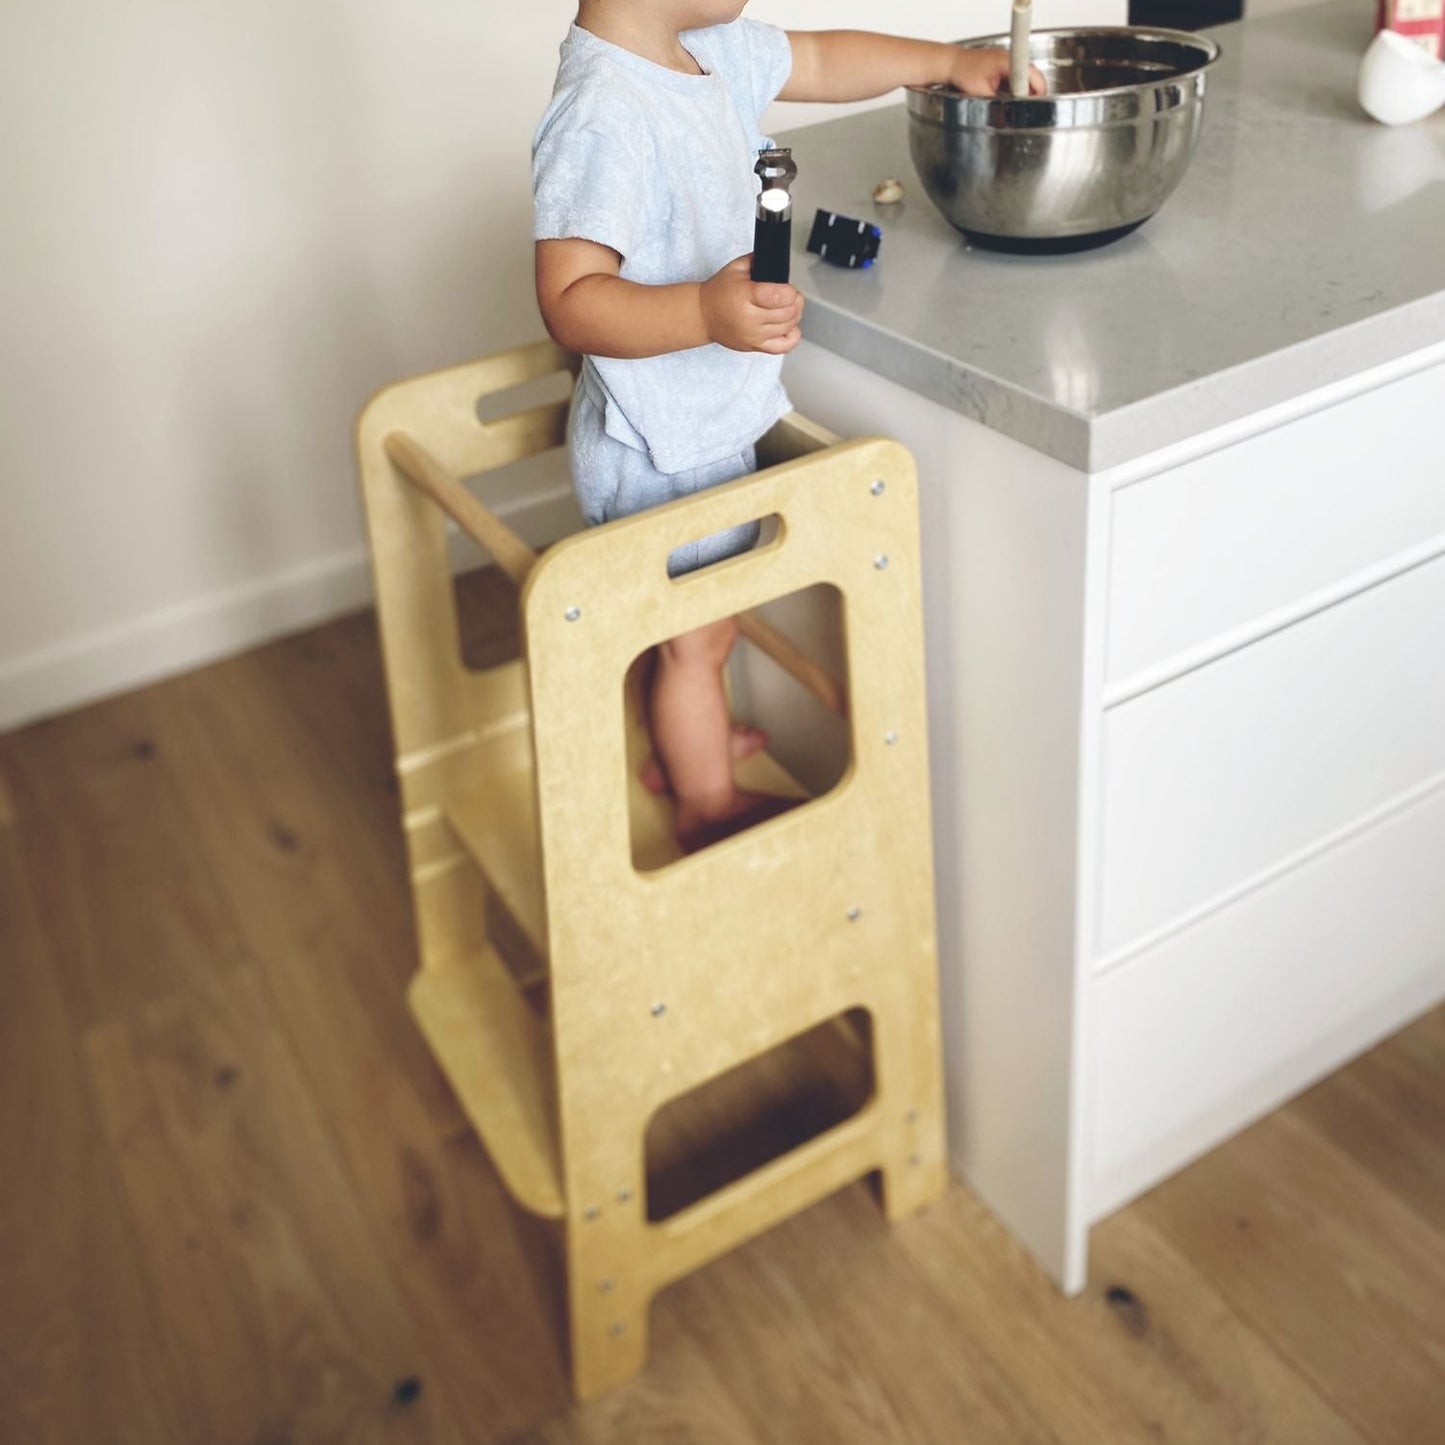 Child standing on 'Adjustable Learning Tower in Natural finish' by Four Little Monkeys, engaging in kitchen activities.